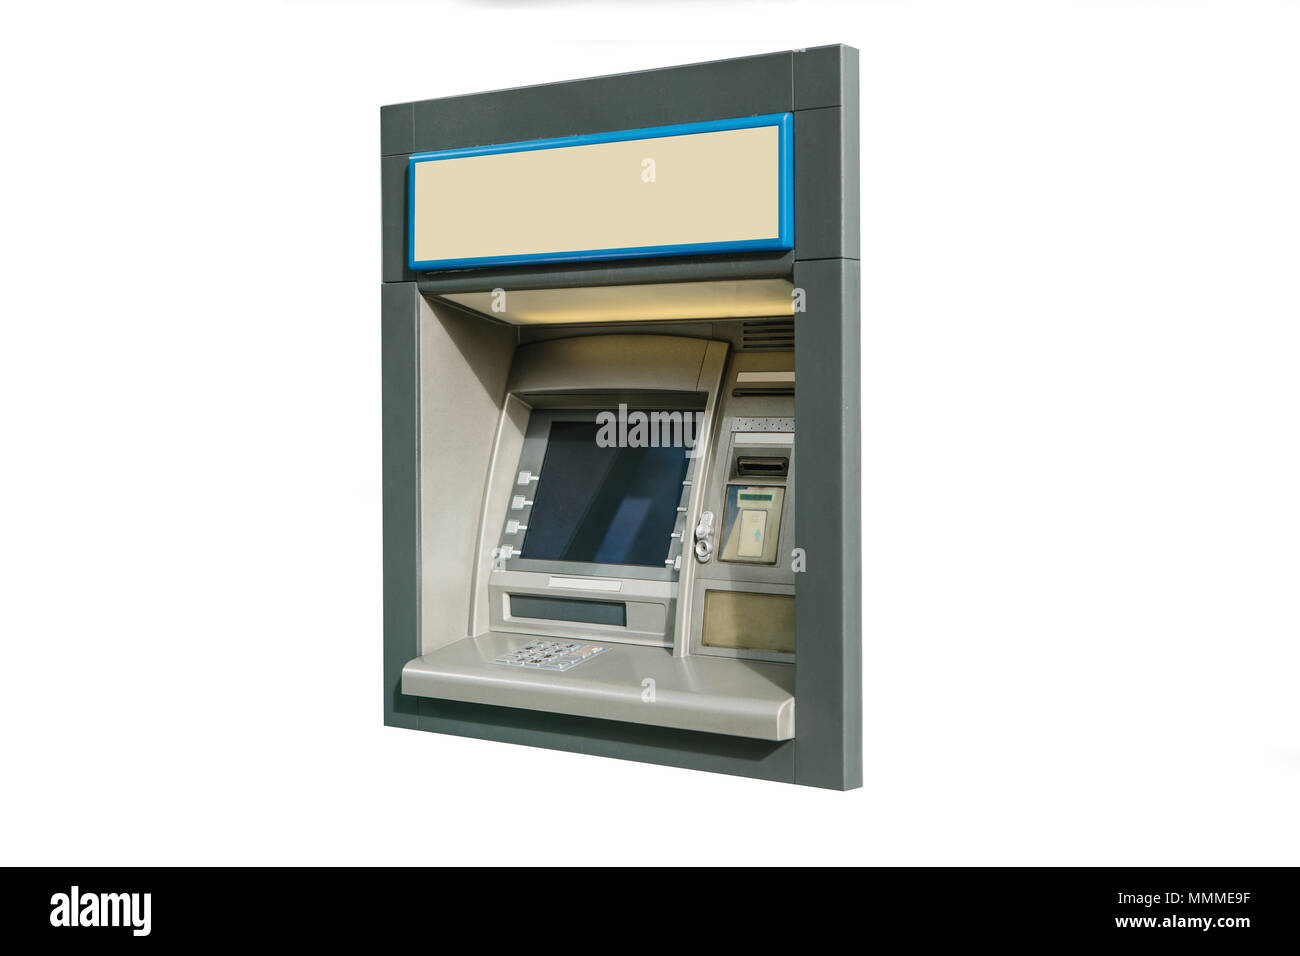 Modern street ATM machine for withdrawal of money and other financial transactions isolated on white background Stock Photo